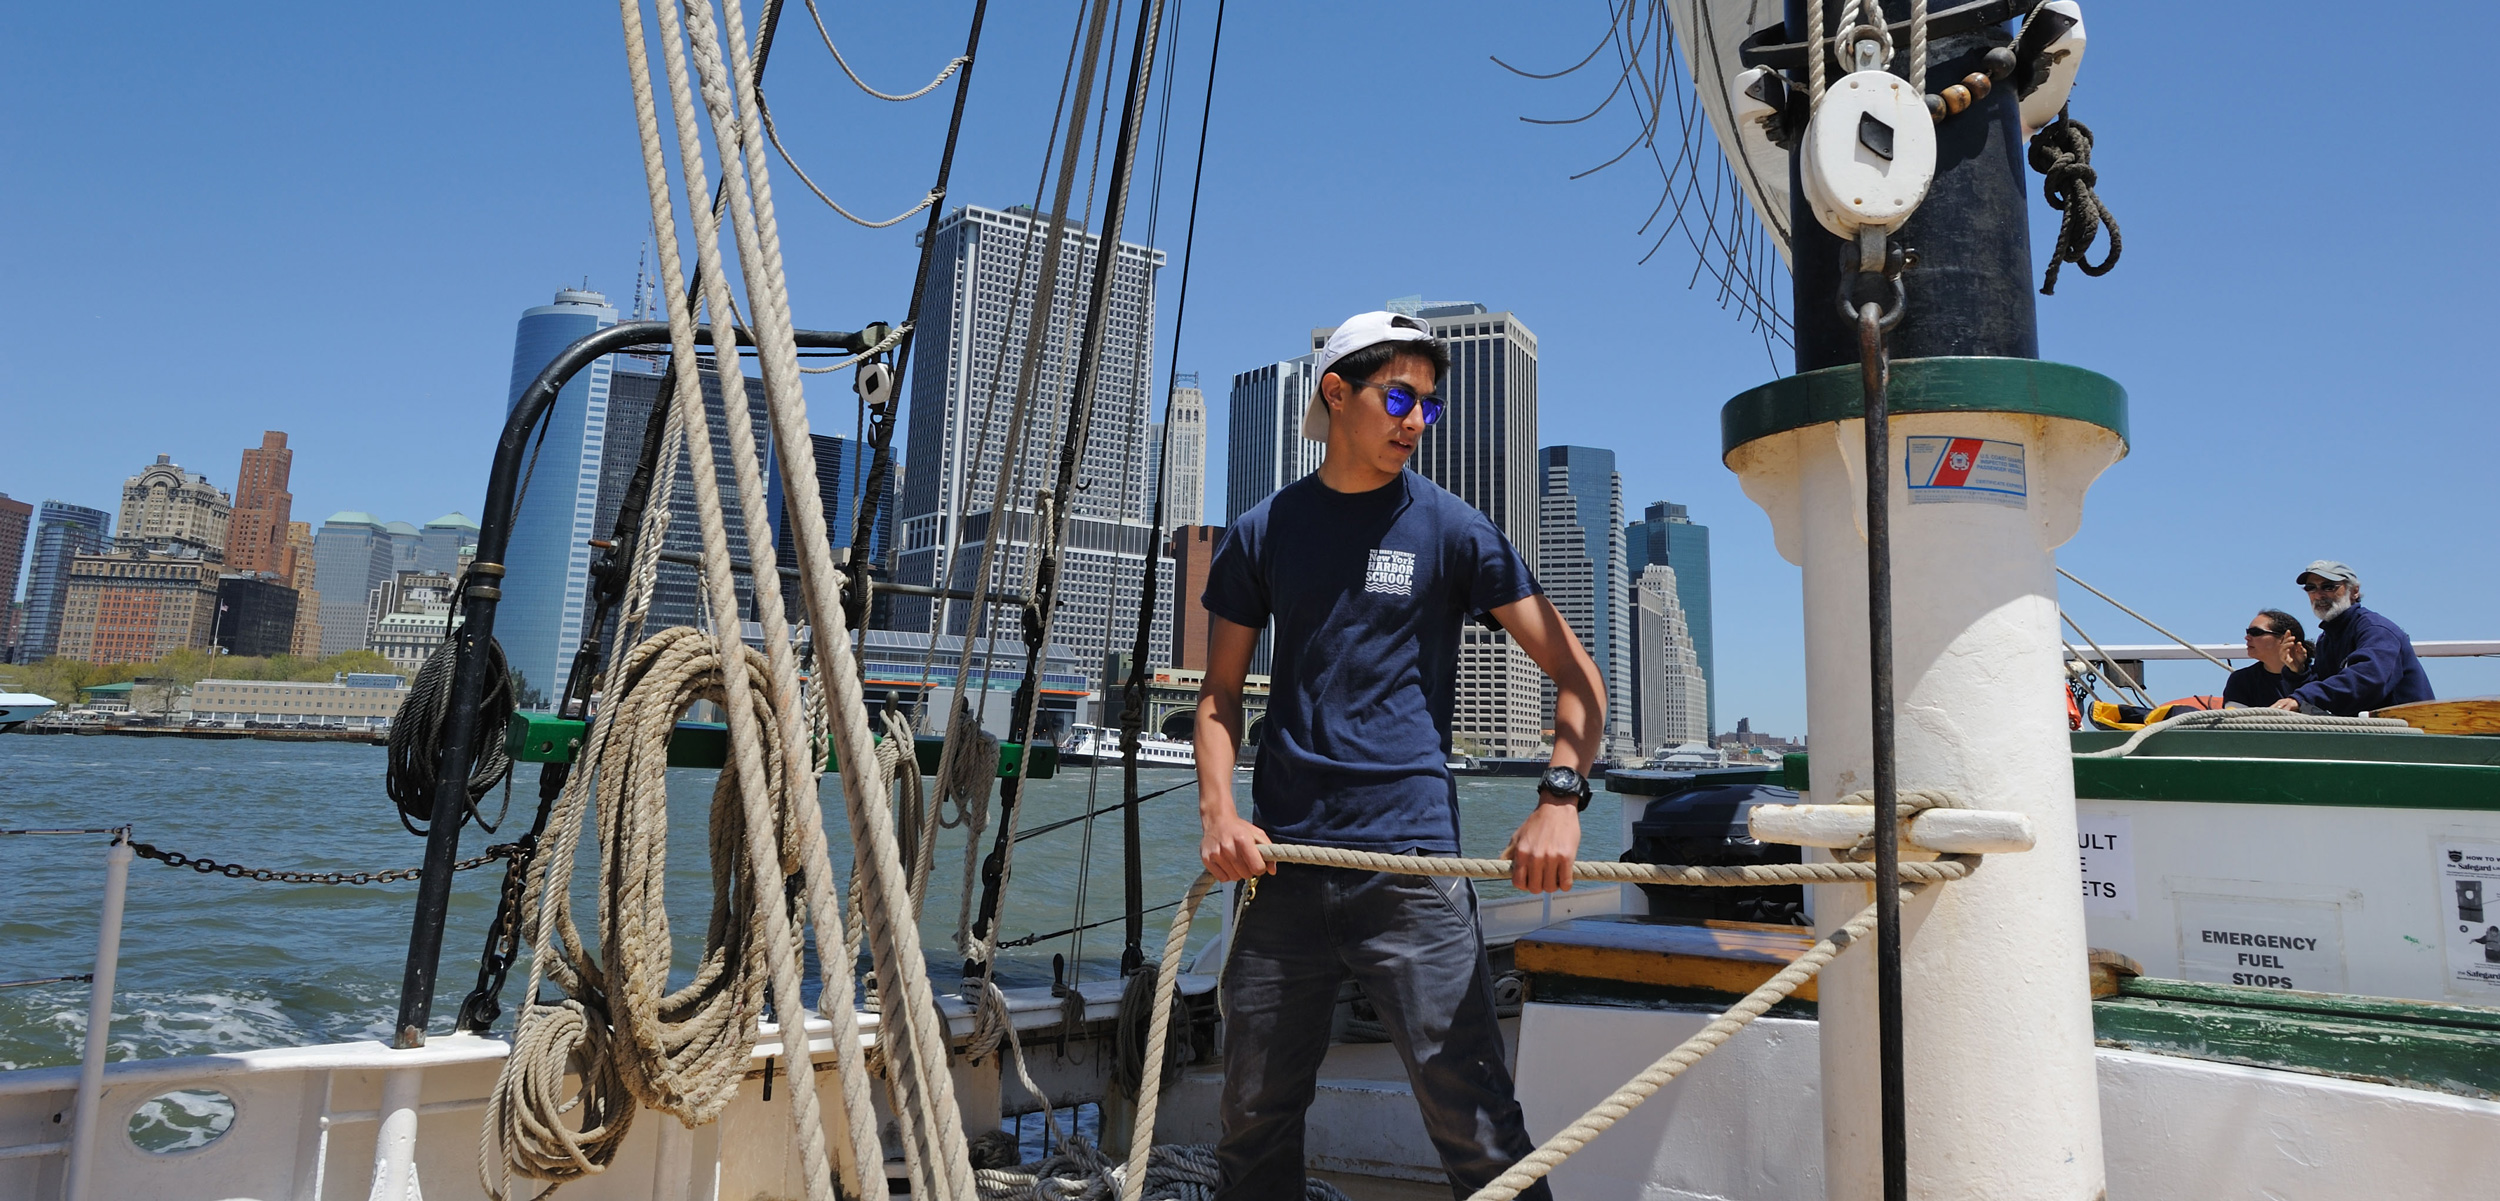 The Urban Assembly New York Harbor School is one of a growing number of high schools around the world teaching students maritime-related skills, such as how to sail. Photo by Terese Loeb Kreuzer/Alamy Stock Photo